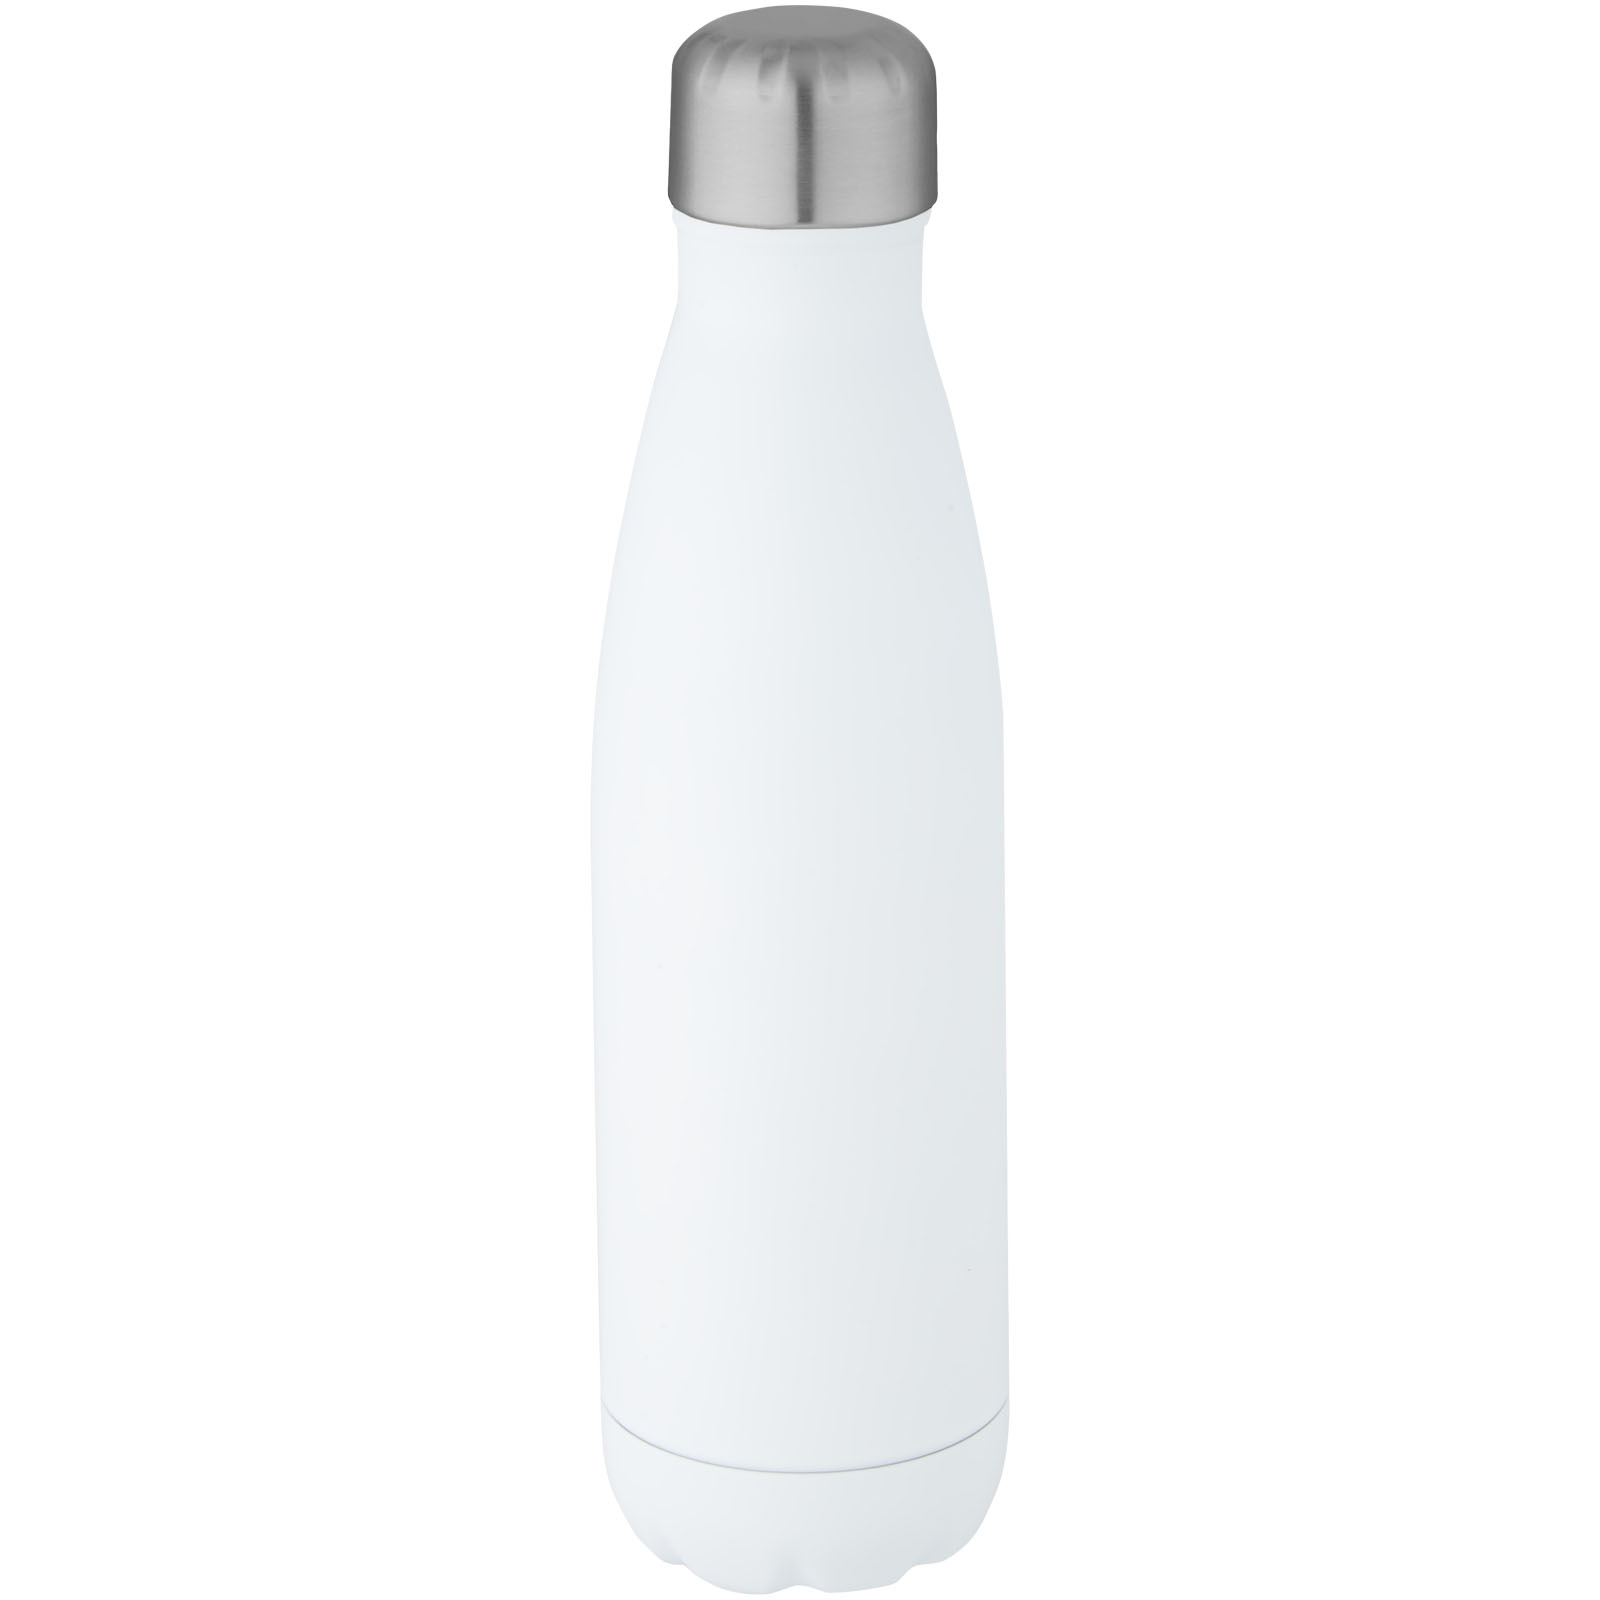 Vacuum Insulated Stainless Steel Water Bottle - Clevedon